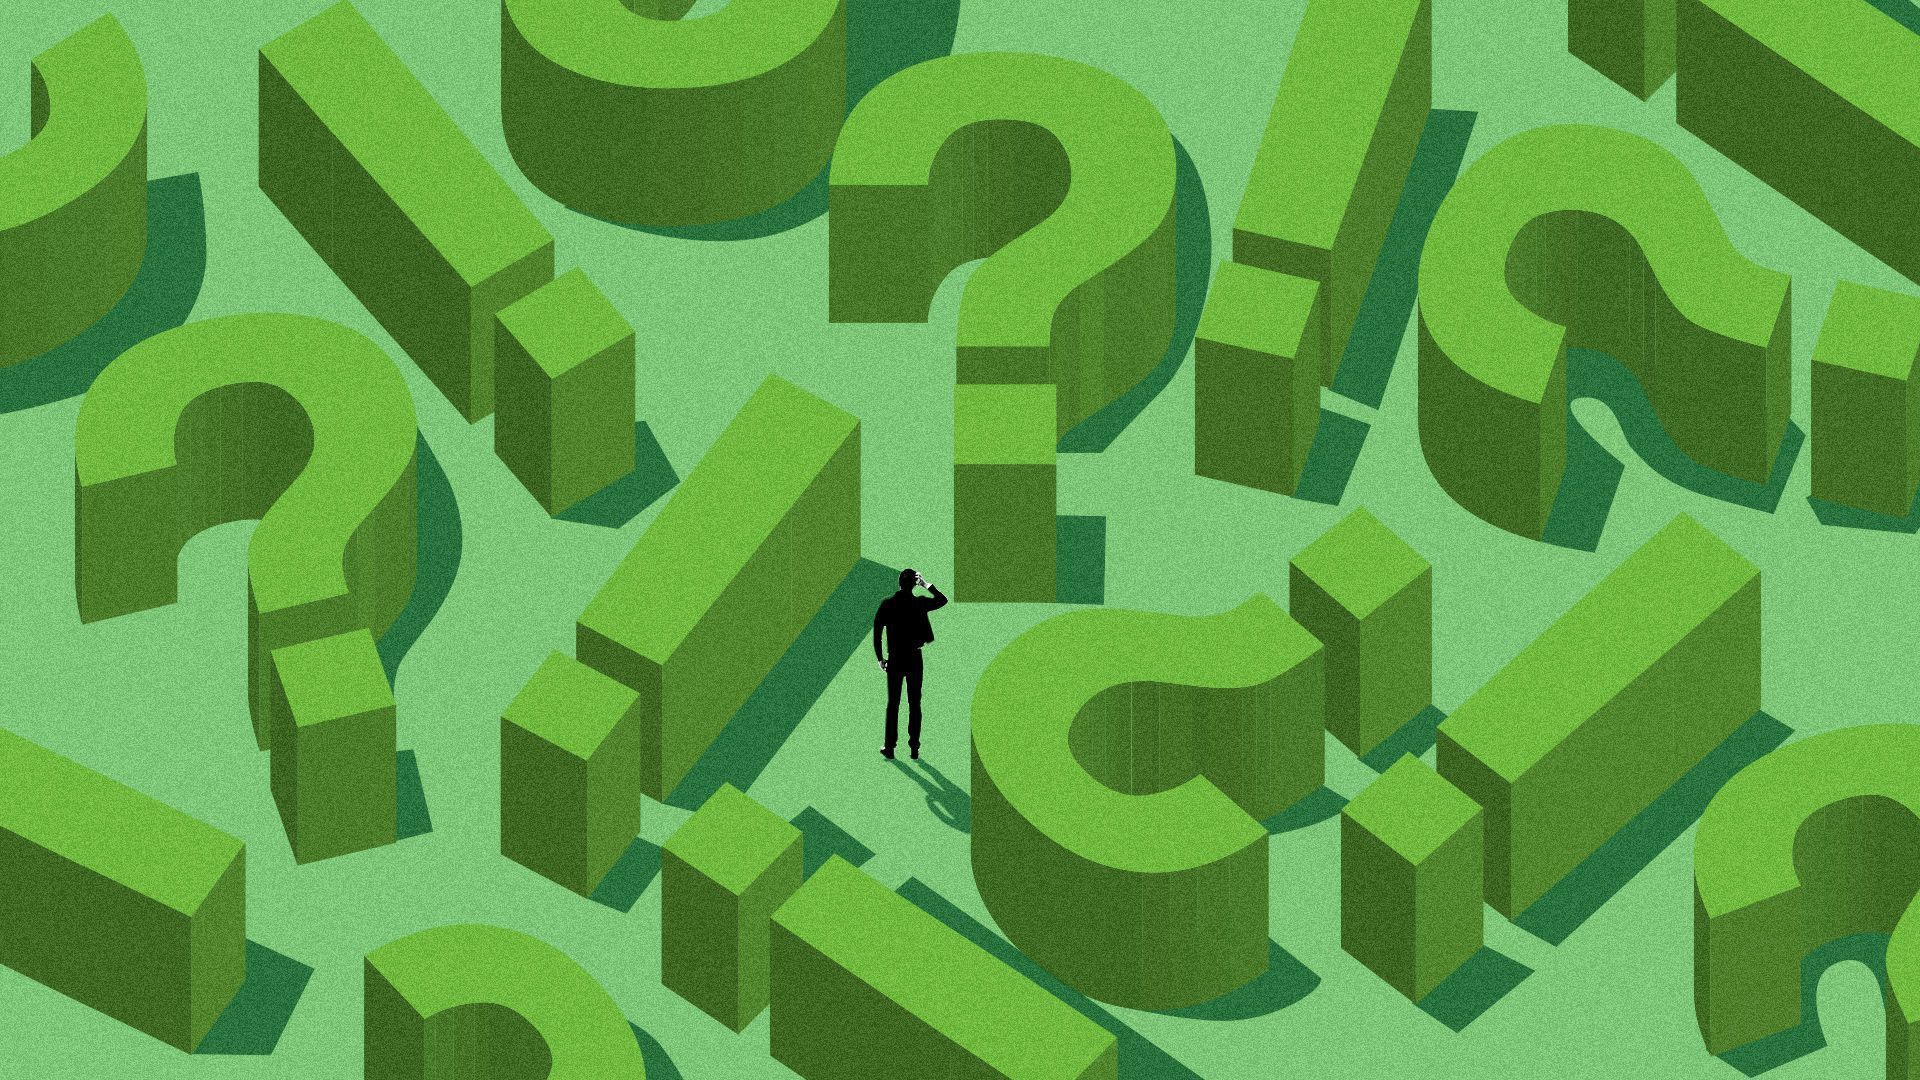 Illustration of a man stuck in a maze of question and exclamation marks